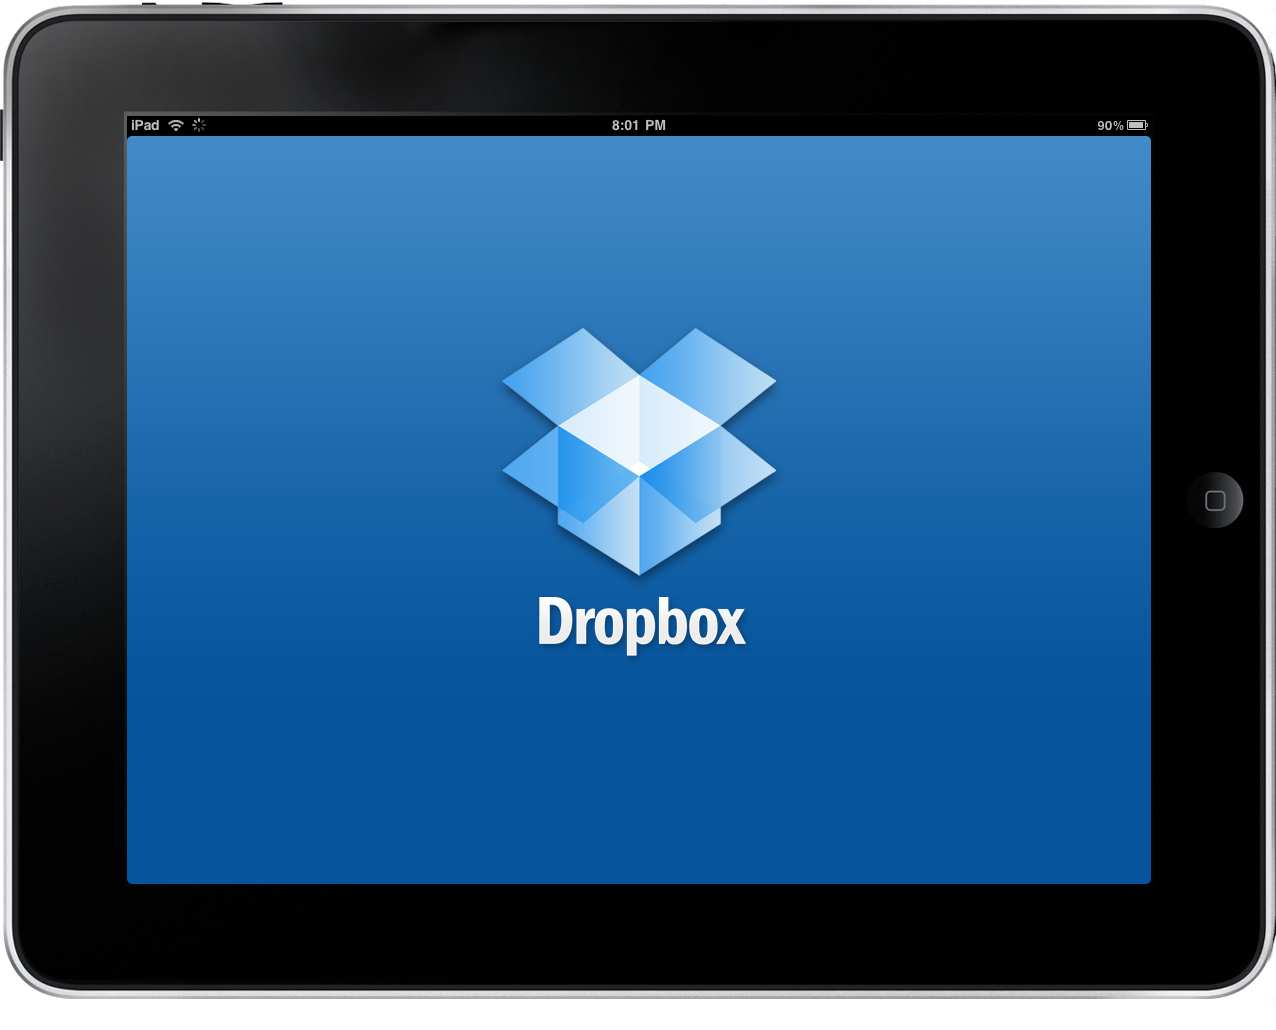 New Dropbox Features: Instant Preview & Virtual Album Sharing